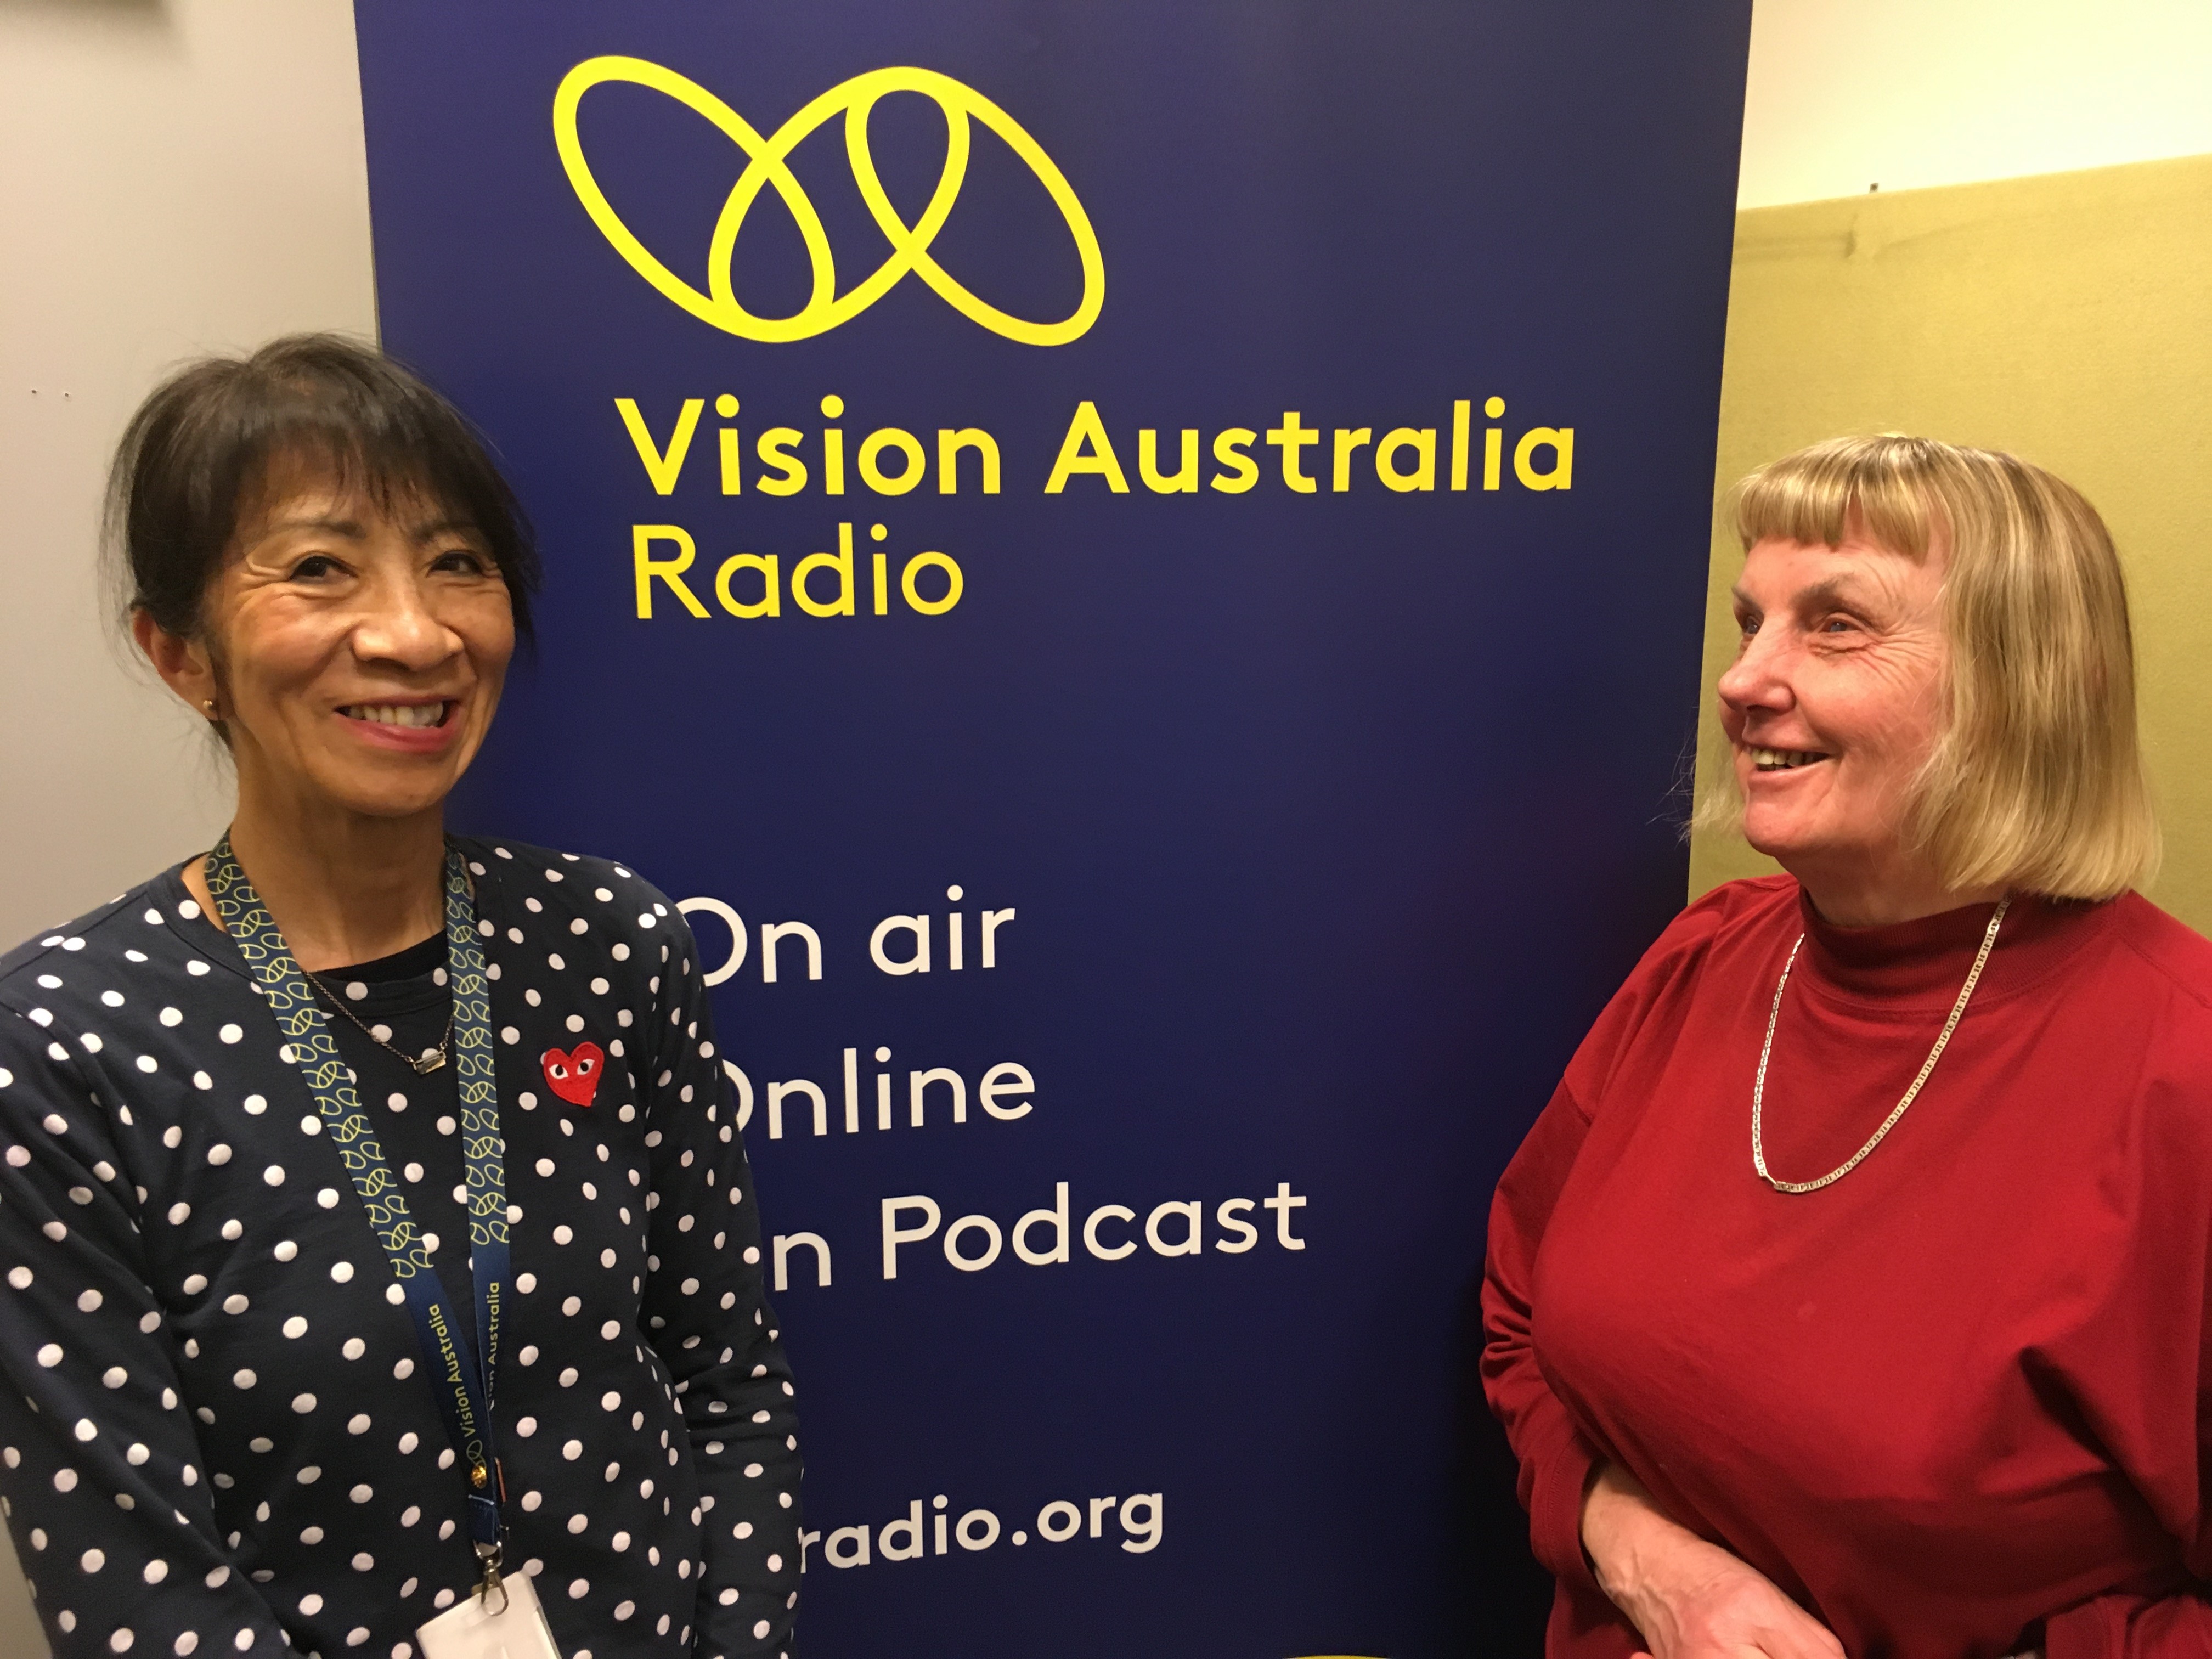 Food for Thought presenters Joy Nuske and Liz Chen in the studio at Vision Australia Radio 